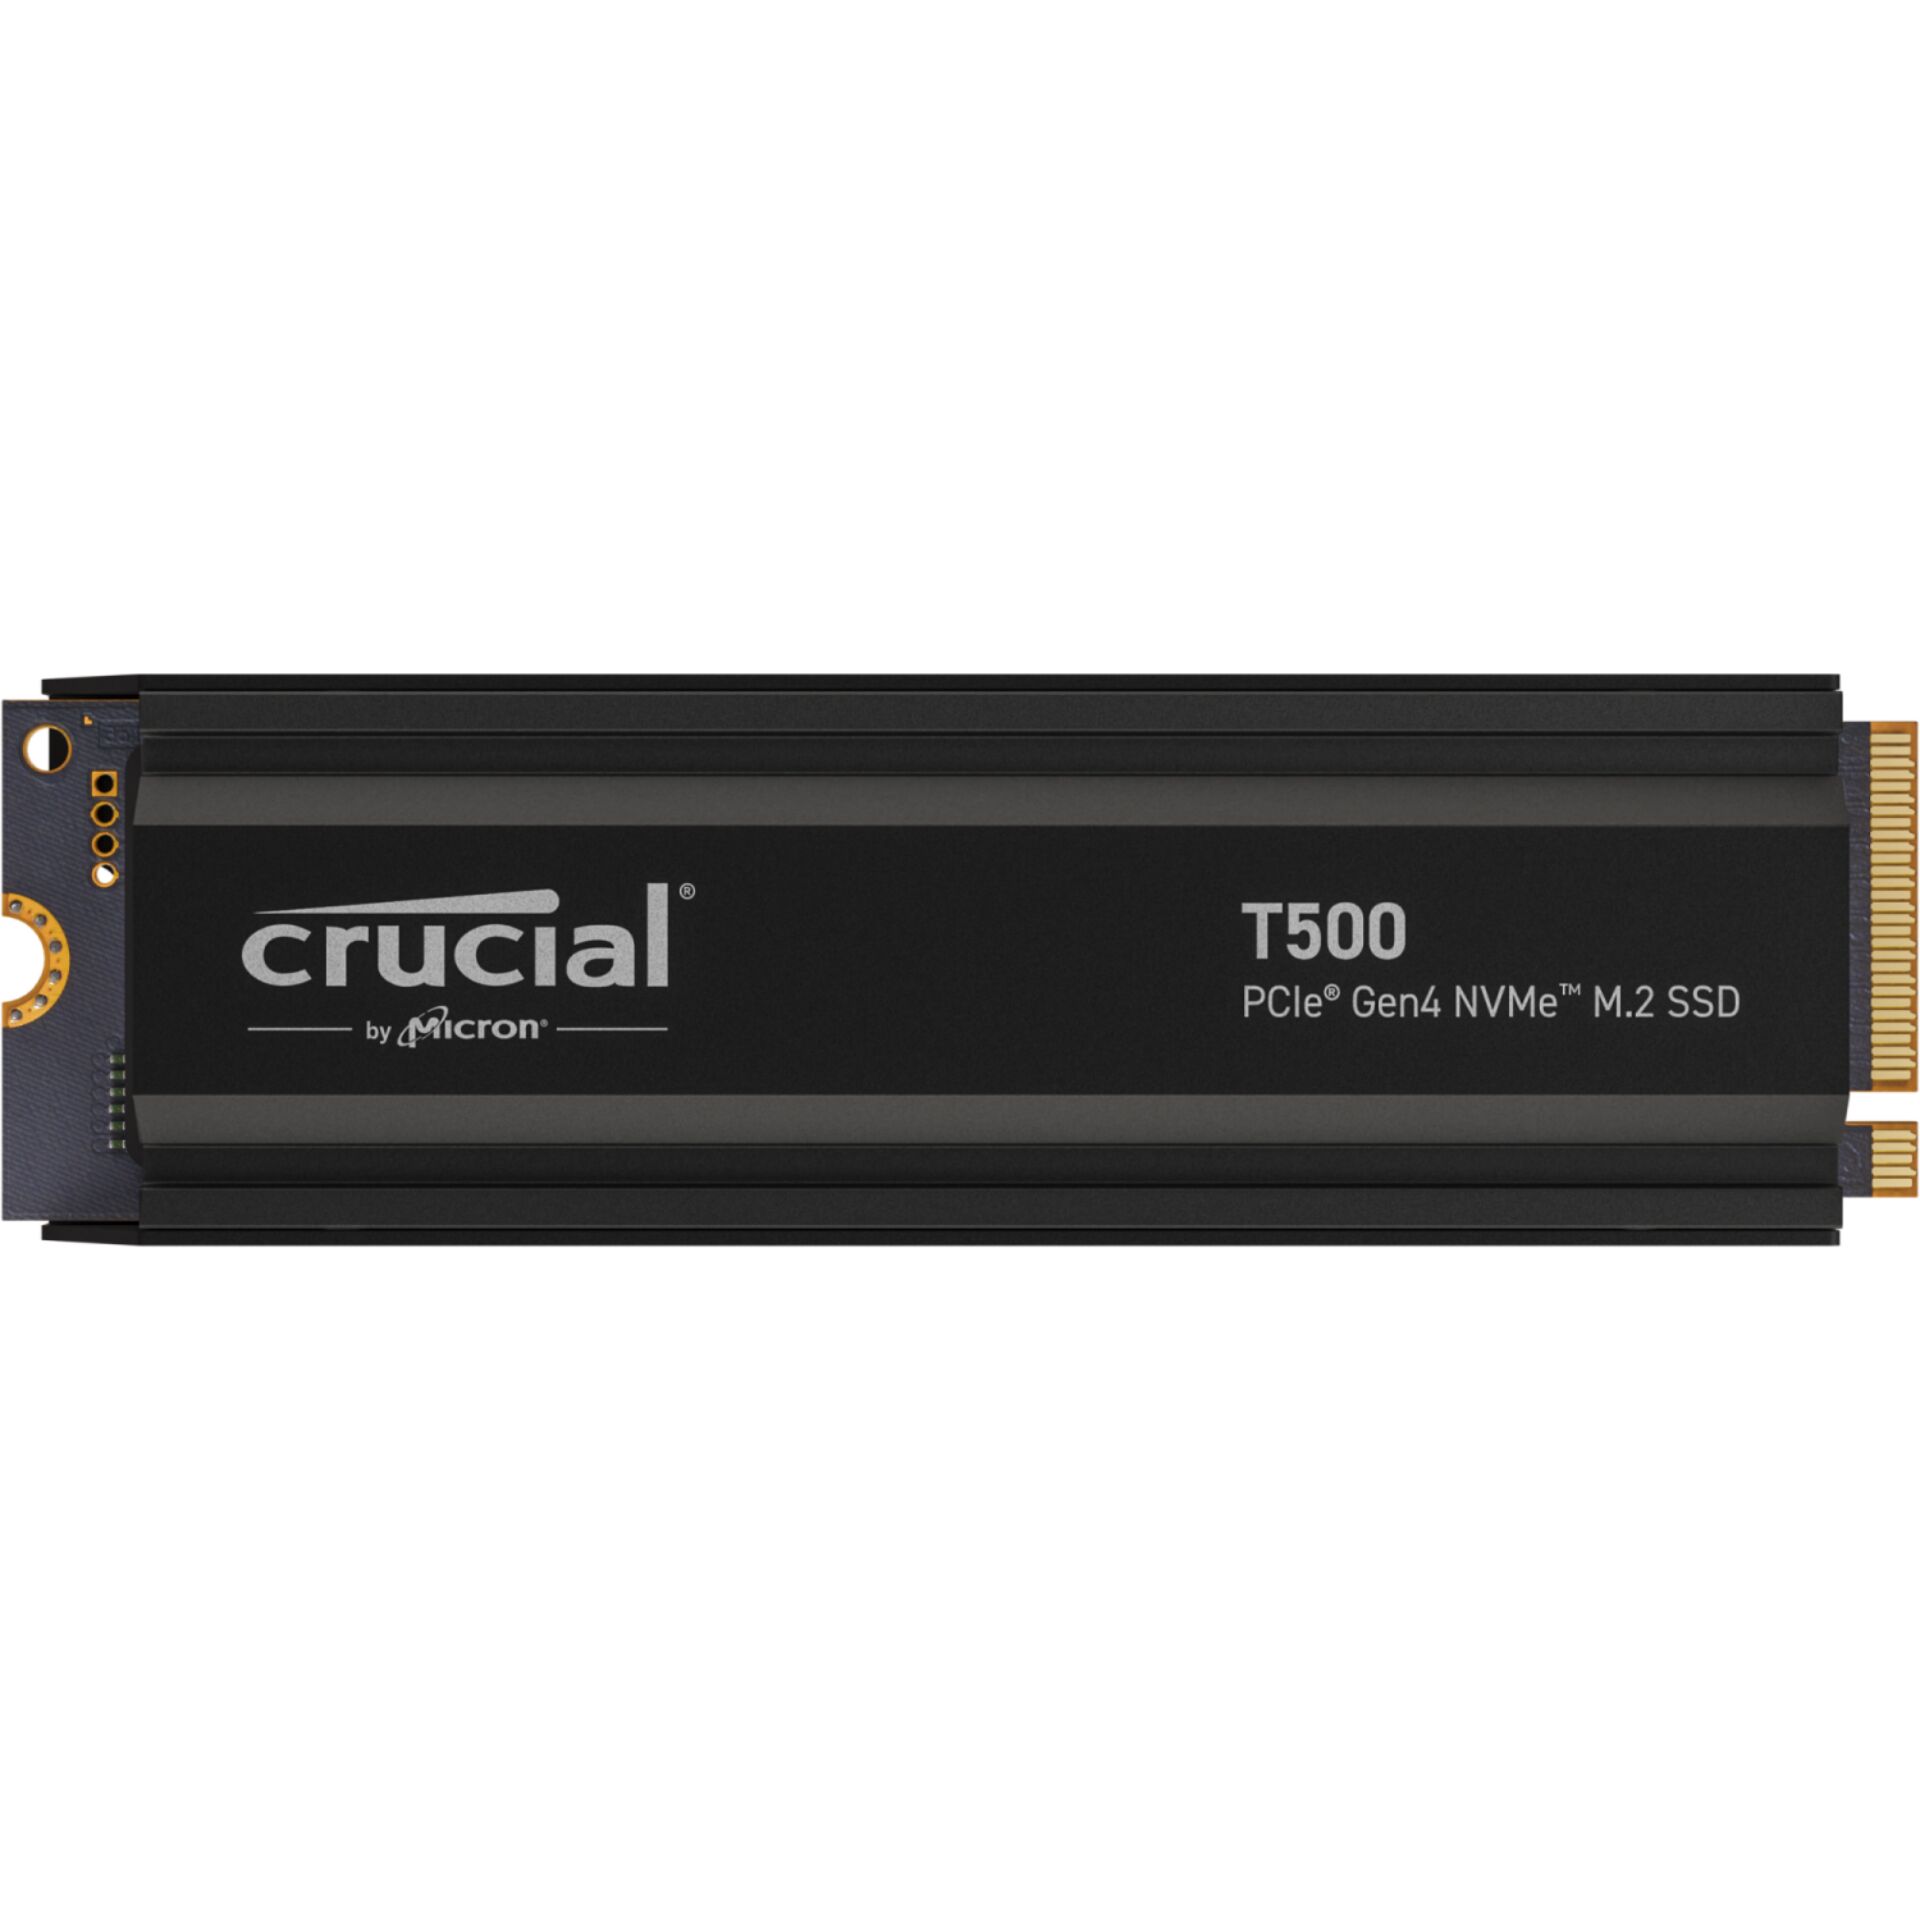 2.0 TB SSD Crucial T500 SSD, M.2/M-Key (PCIe 4.0 x4), lesen: 7400MB/s, schreiben: 7000MB/s SLC-Cached, TBW: 1.2PB